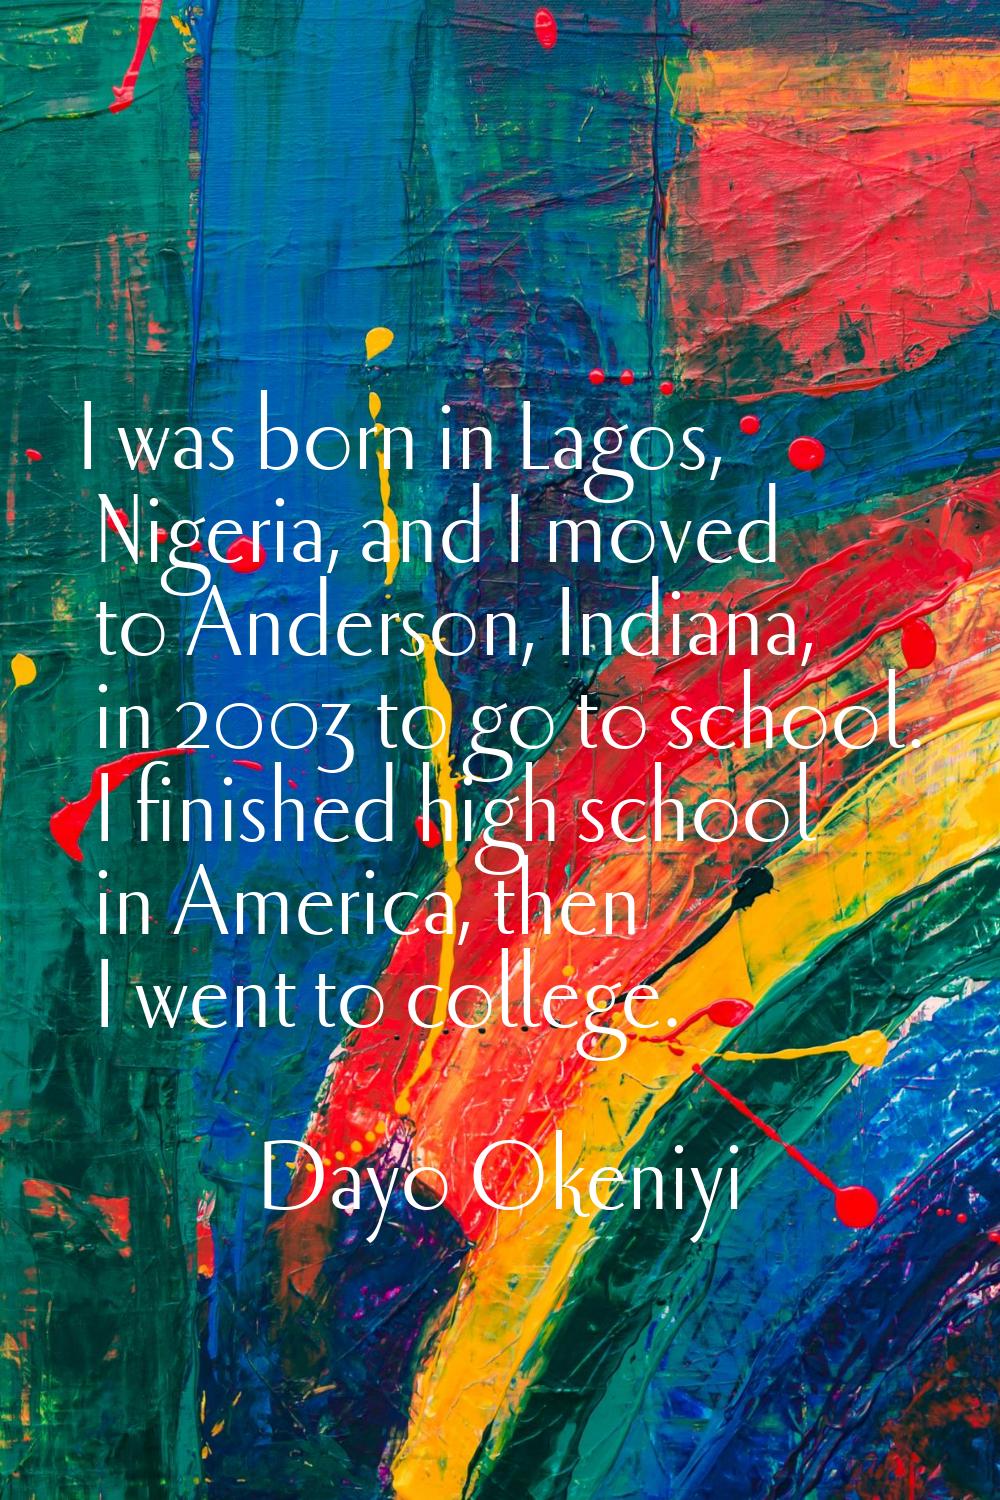 I was born in Lagos, Nigeria, and I moved to Anderson, Indiana, in 2003 to go to school. I finished